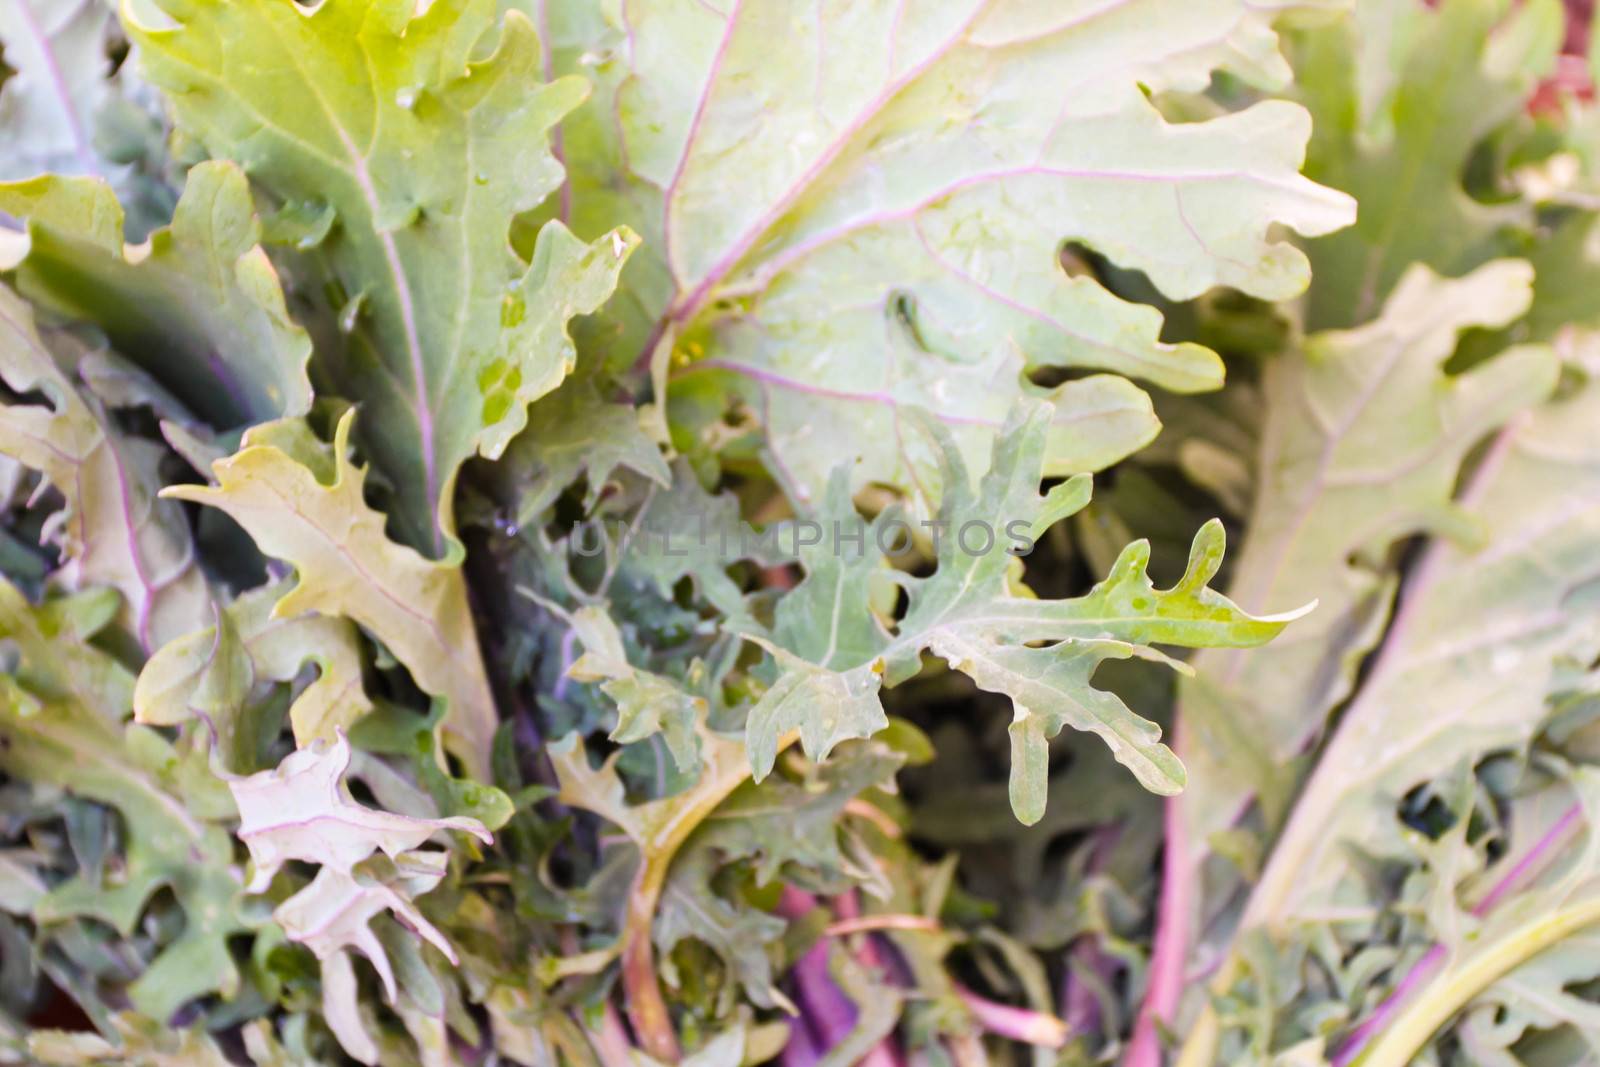 Mesclun or red kale at a farmers market.